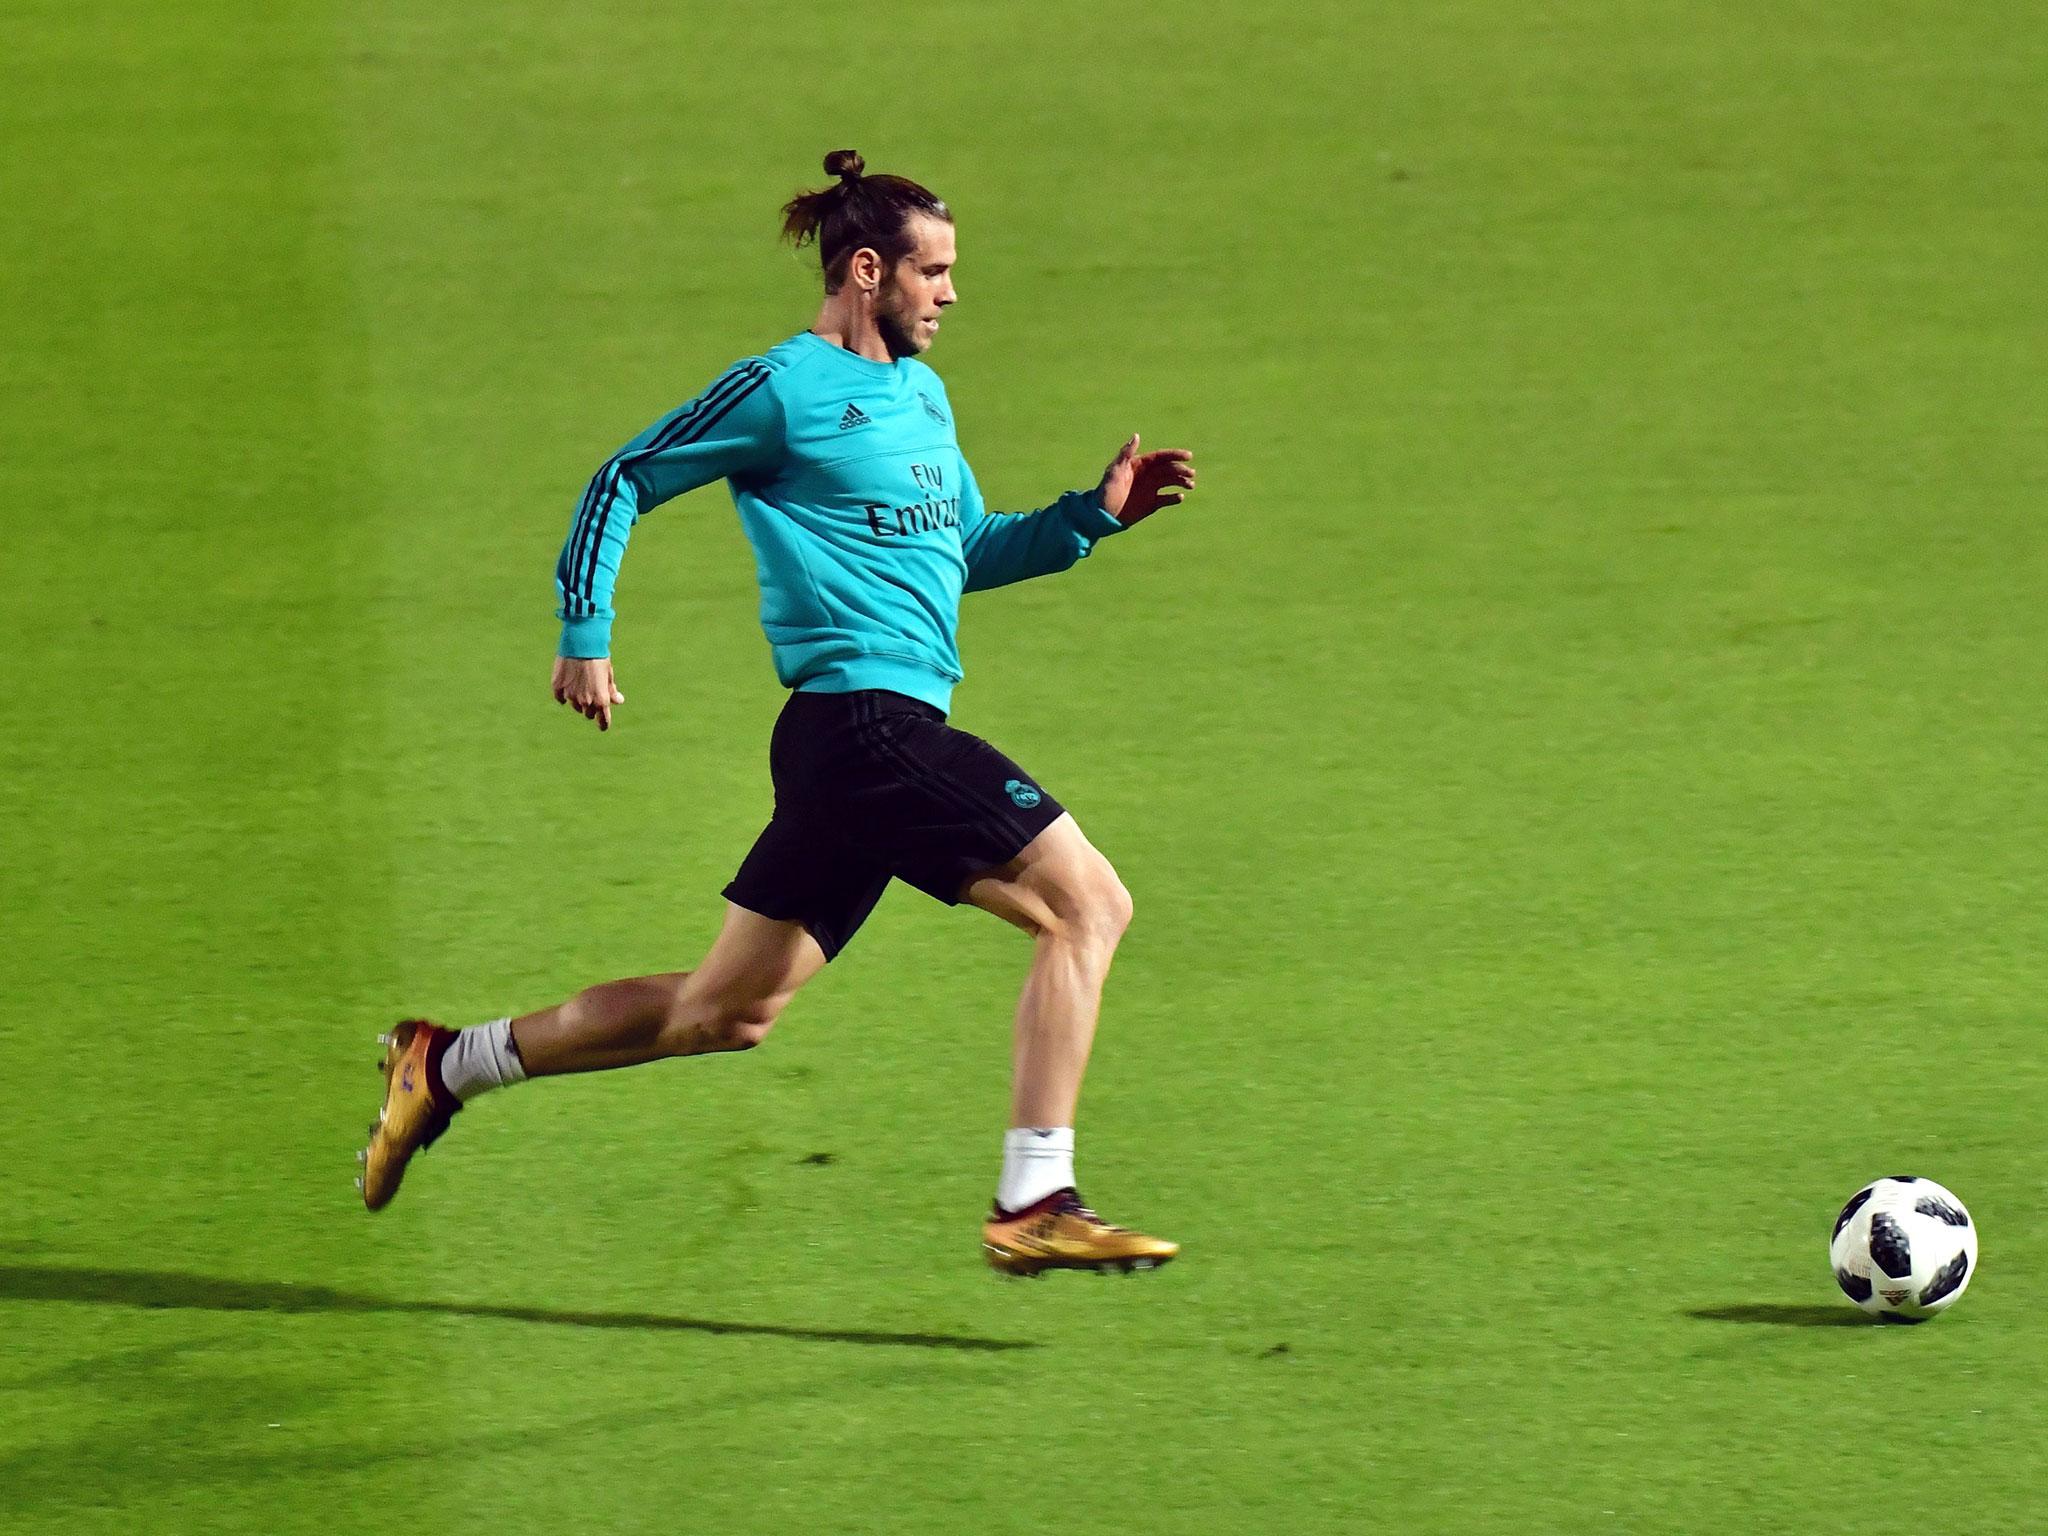 Gareth Bale's season has been plagued by repeated injury